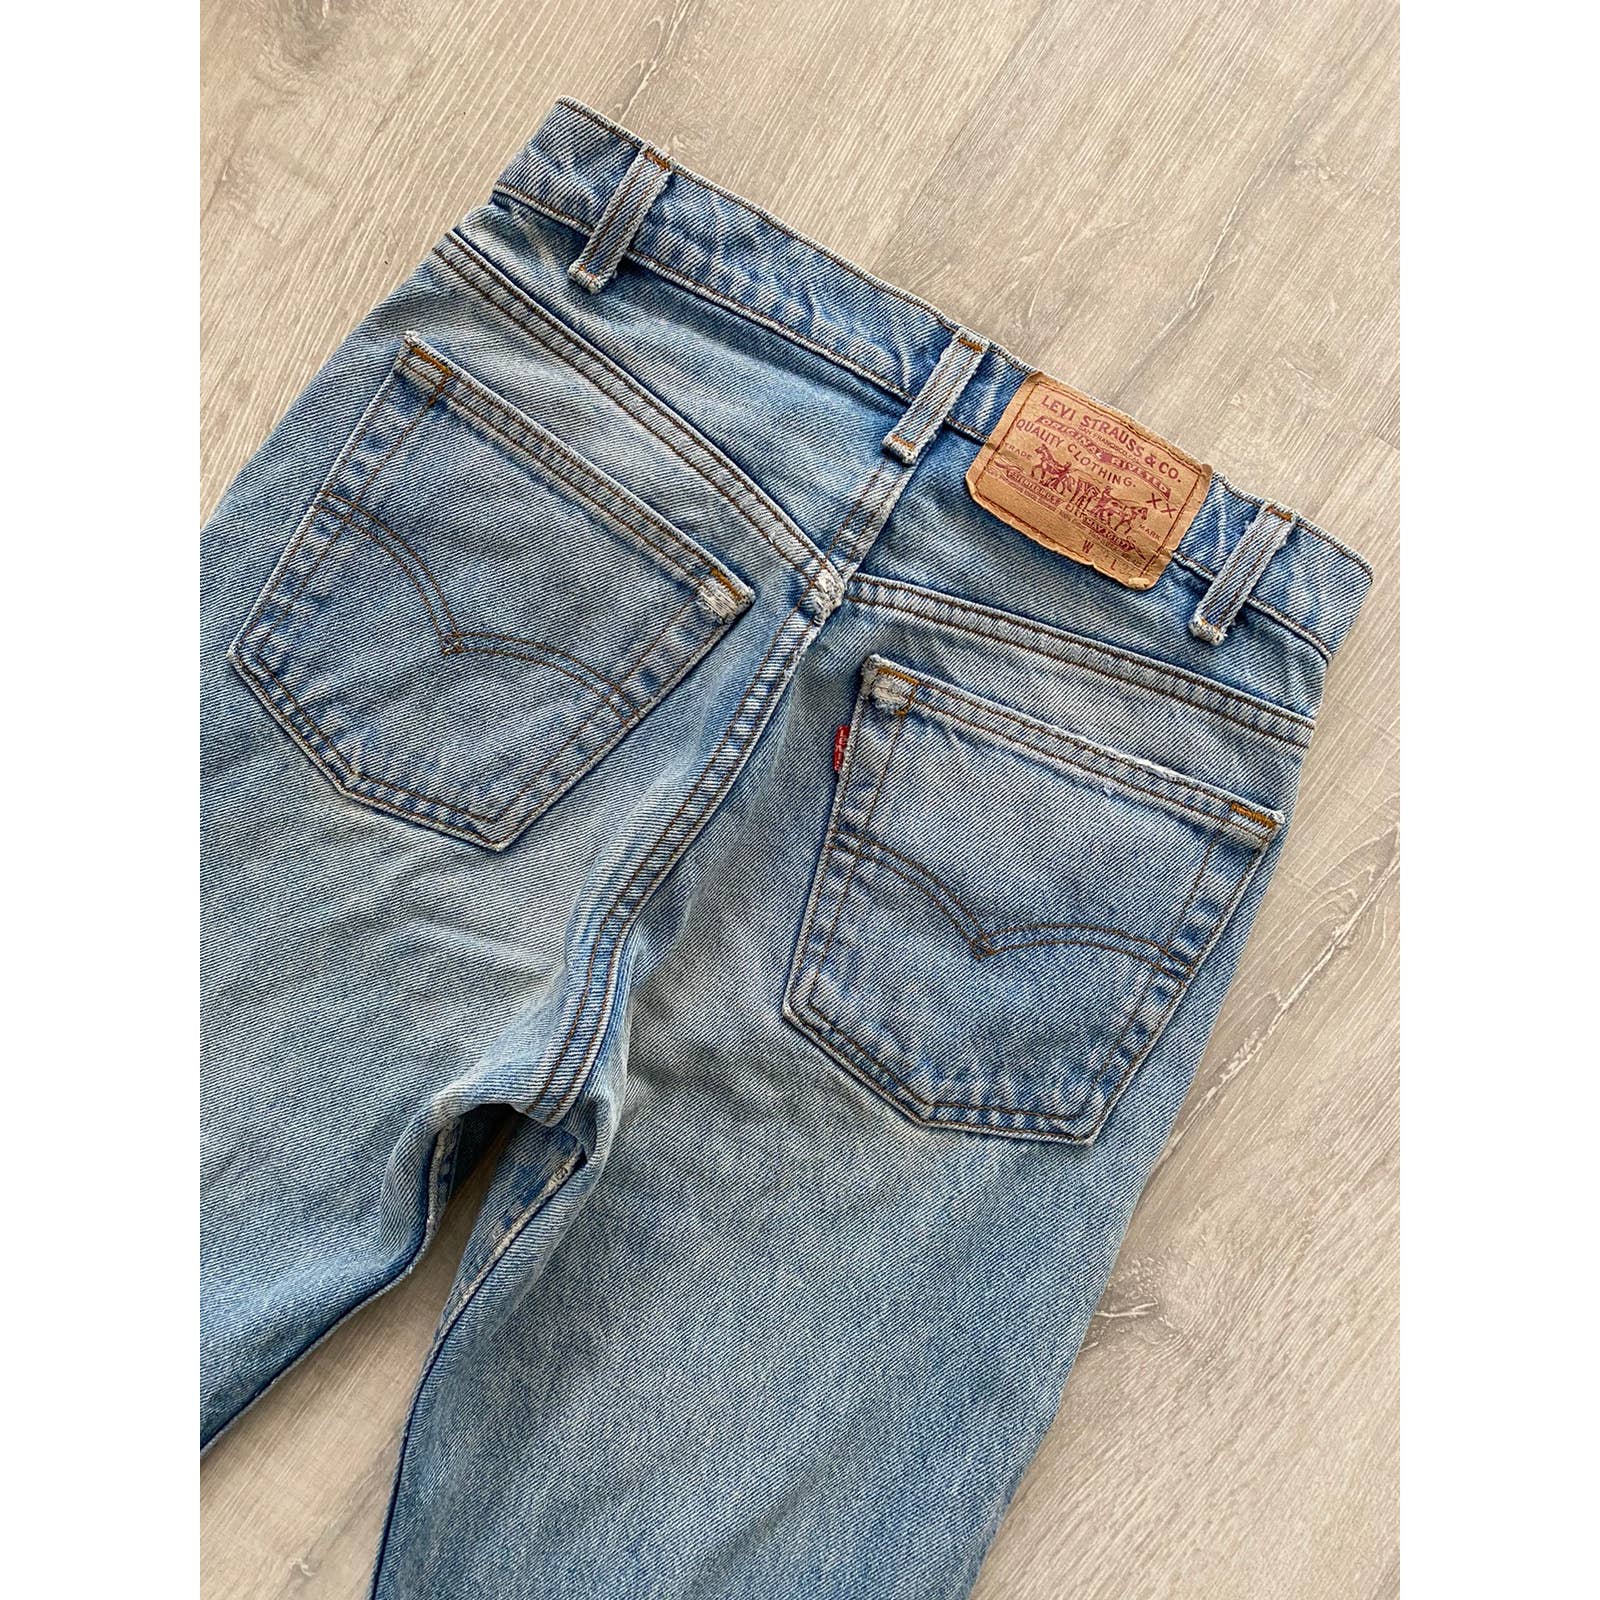 90s Levi's 505 vintage baby blue jeans made in USA denim – 